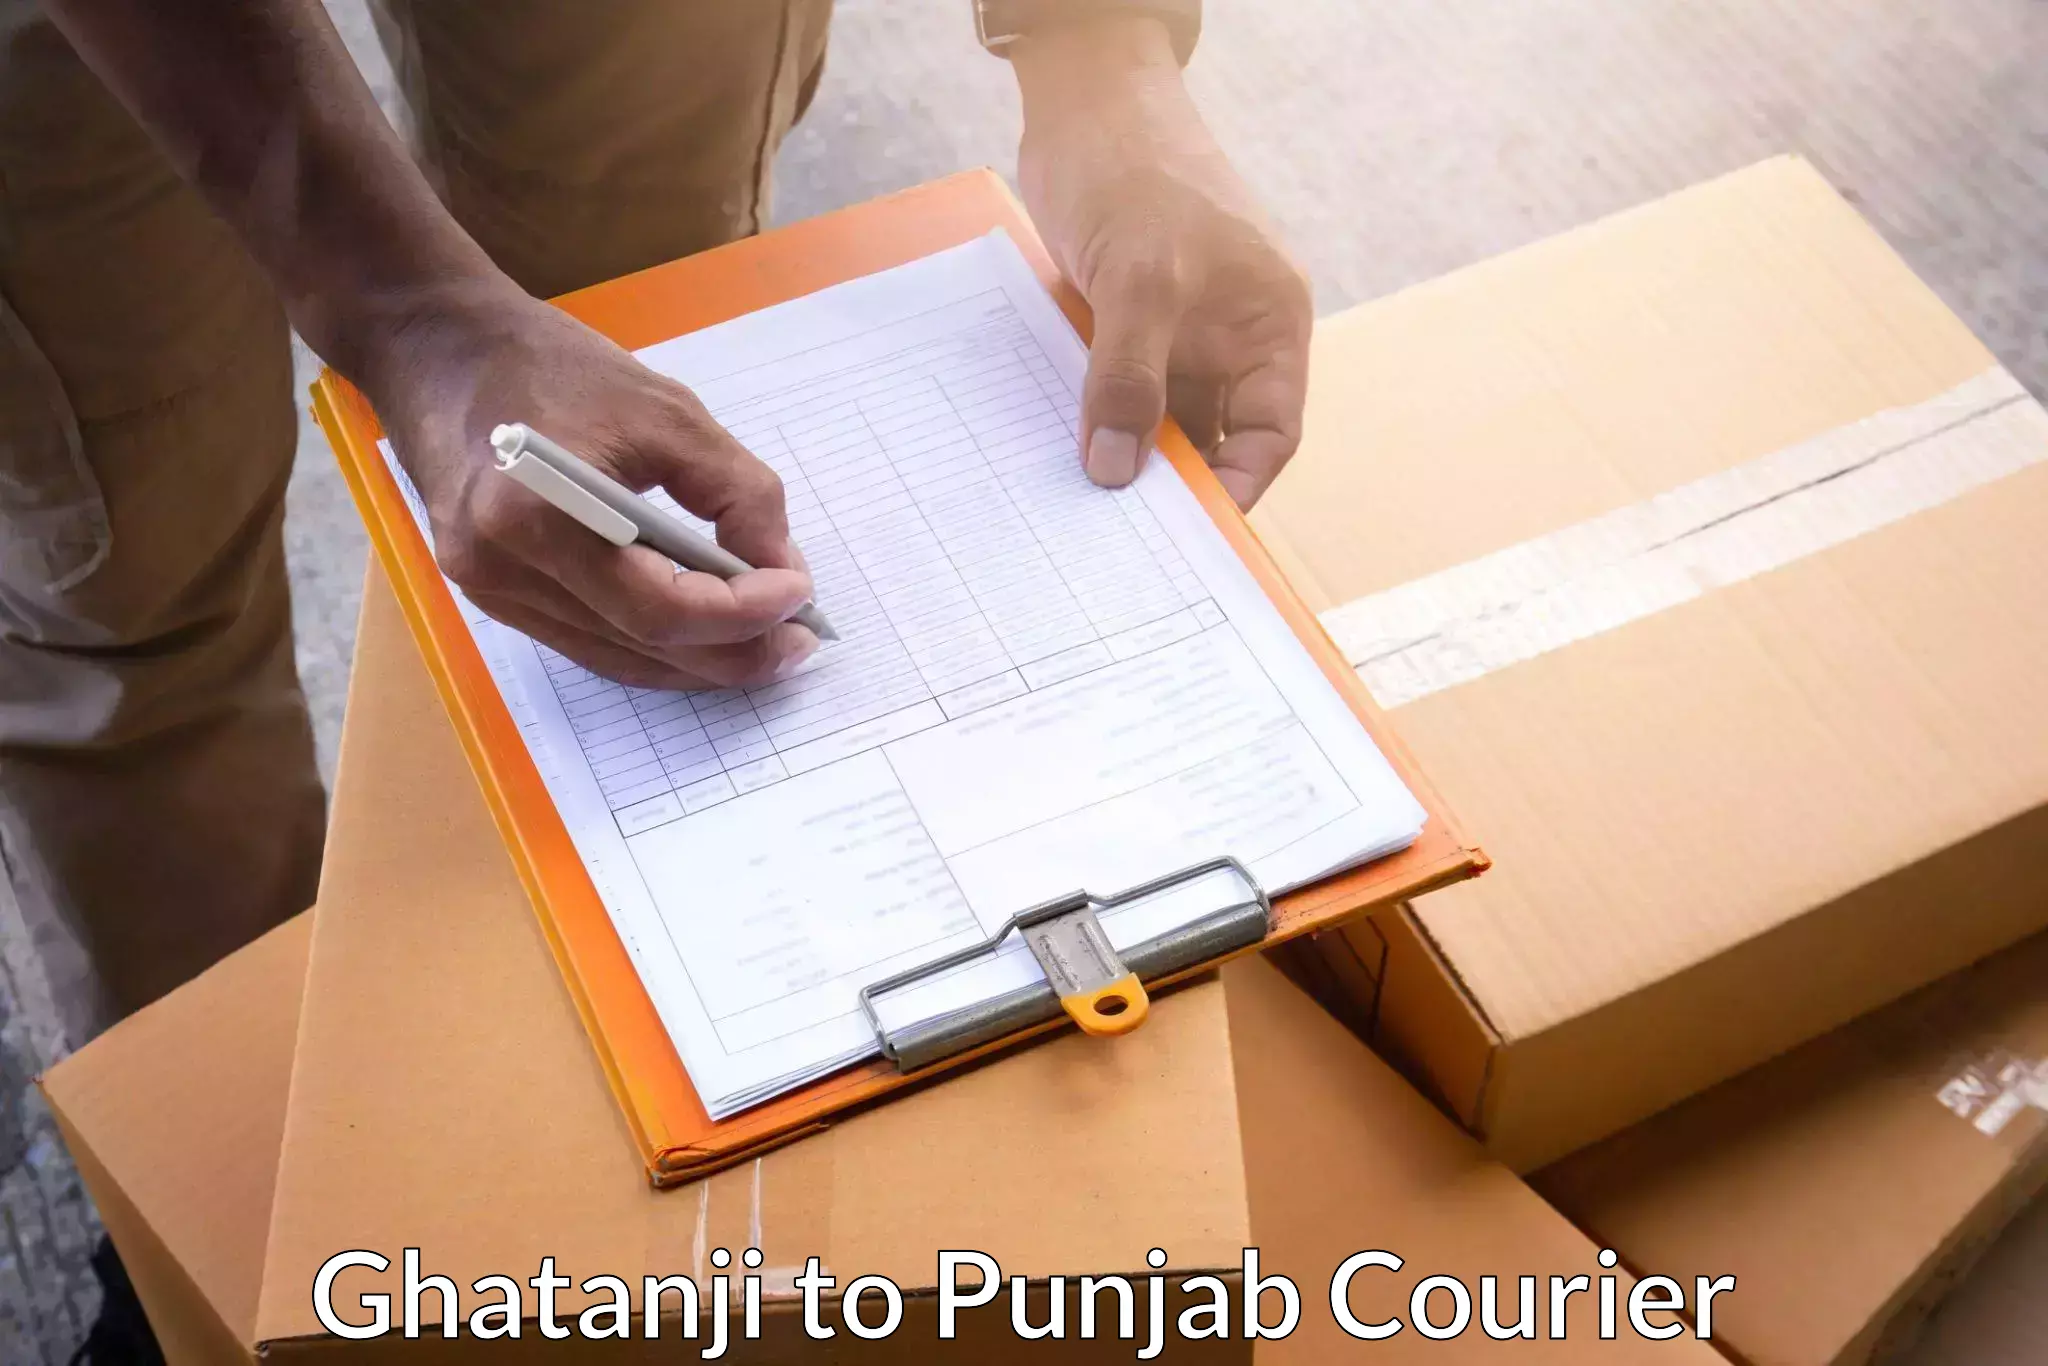 Nationwide delivery network Ghatanji to Amritsar